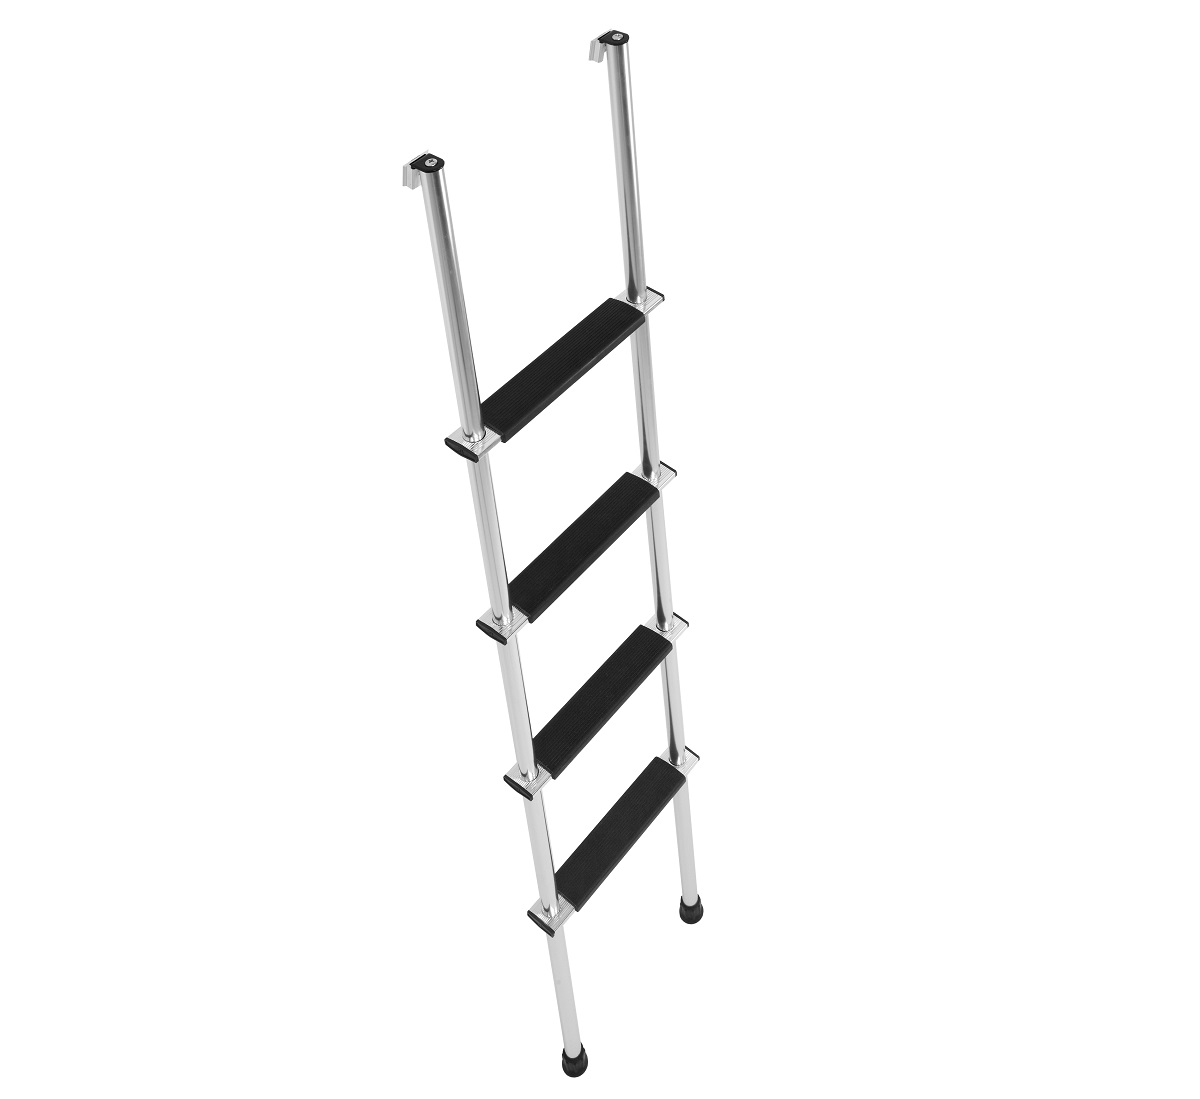 An image of a Stromberg Carlson LA-466 Bunk Ladder on a white background.